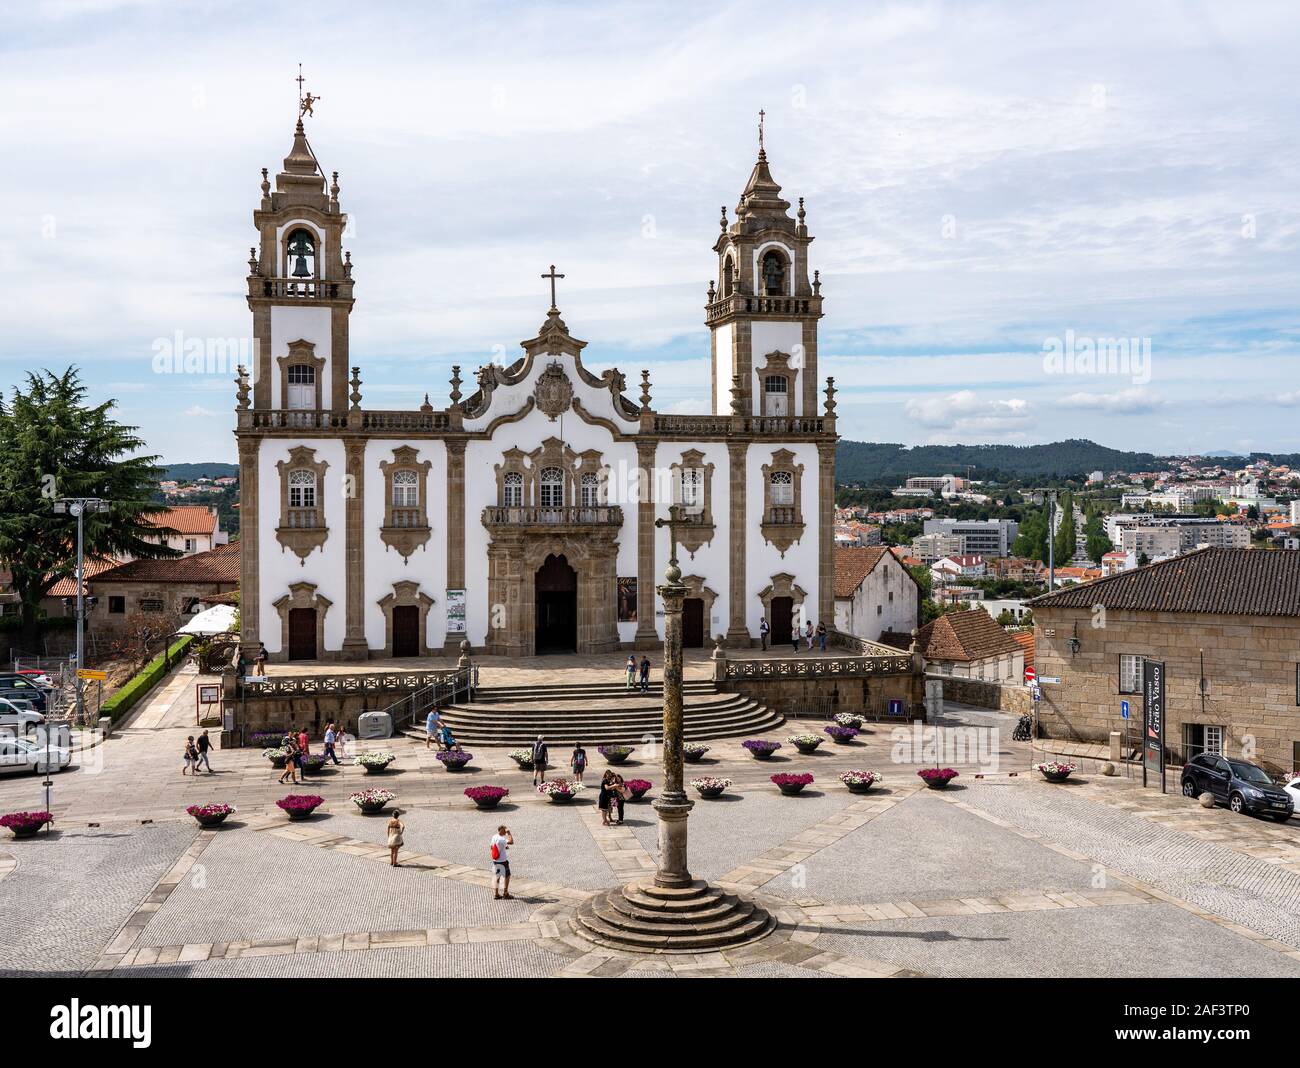 Viseu, Portugal - 19 August 2019: Main square in the old town of Viseu with the Misericordia church and stone cross Stock Photo